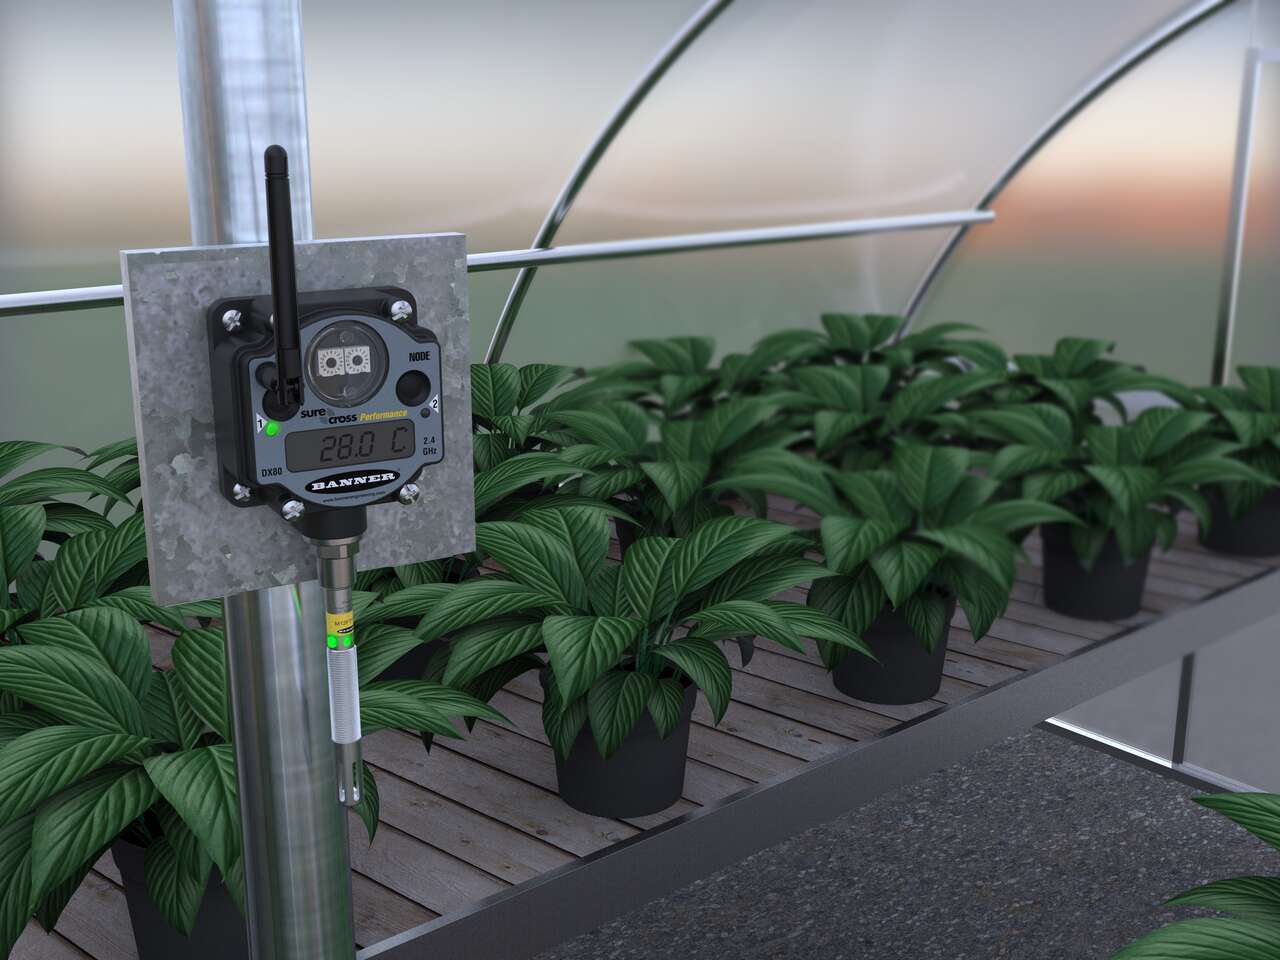 Temperature monitoring in a greenhouse application image